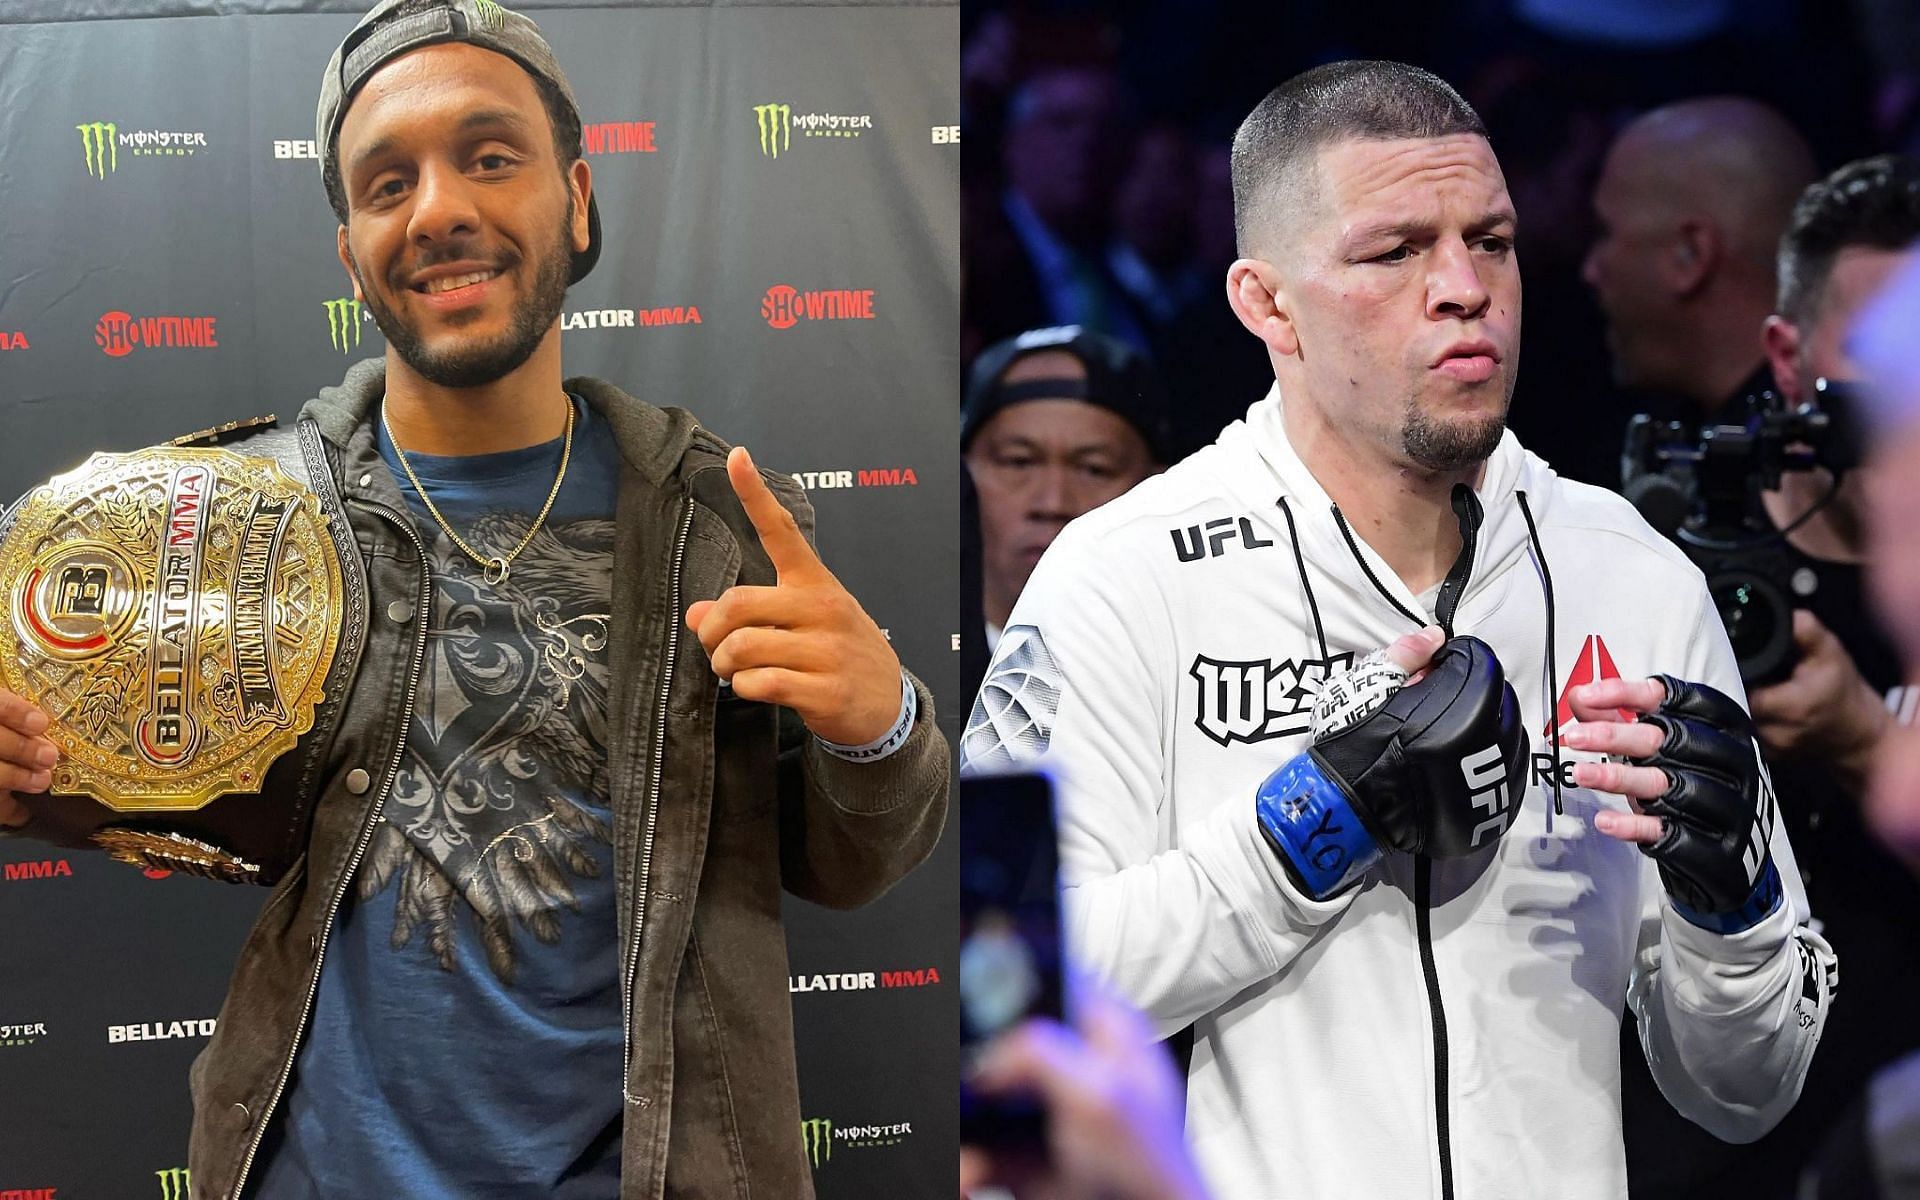 AJ McKee (left) urges UFC star Nate Diaz (right) to join Bellator